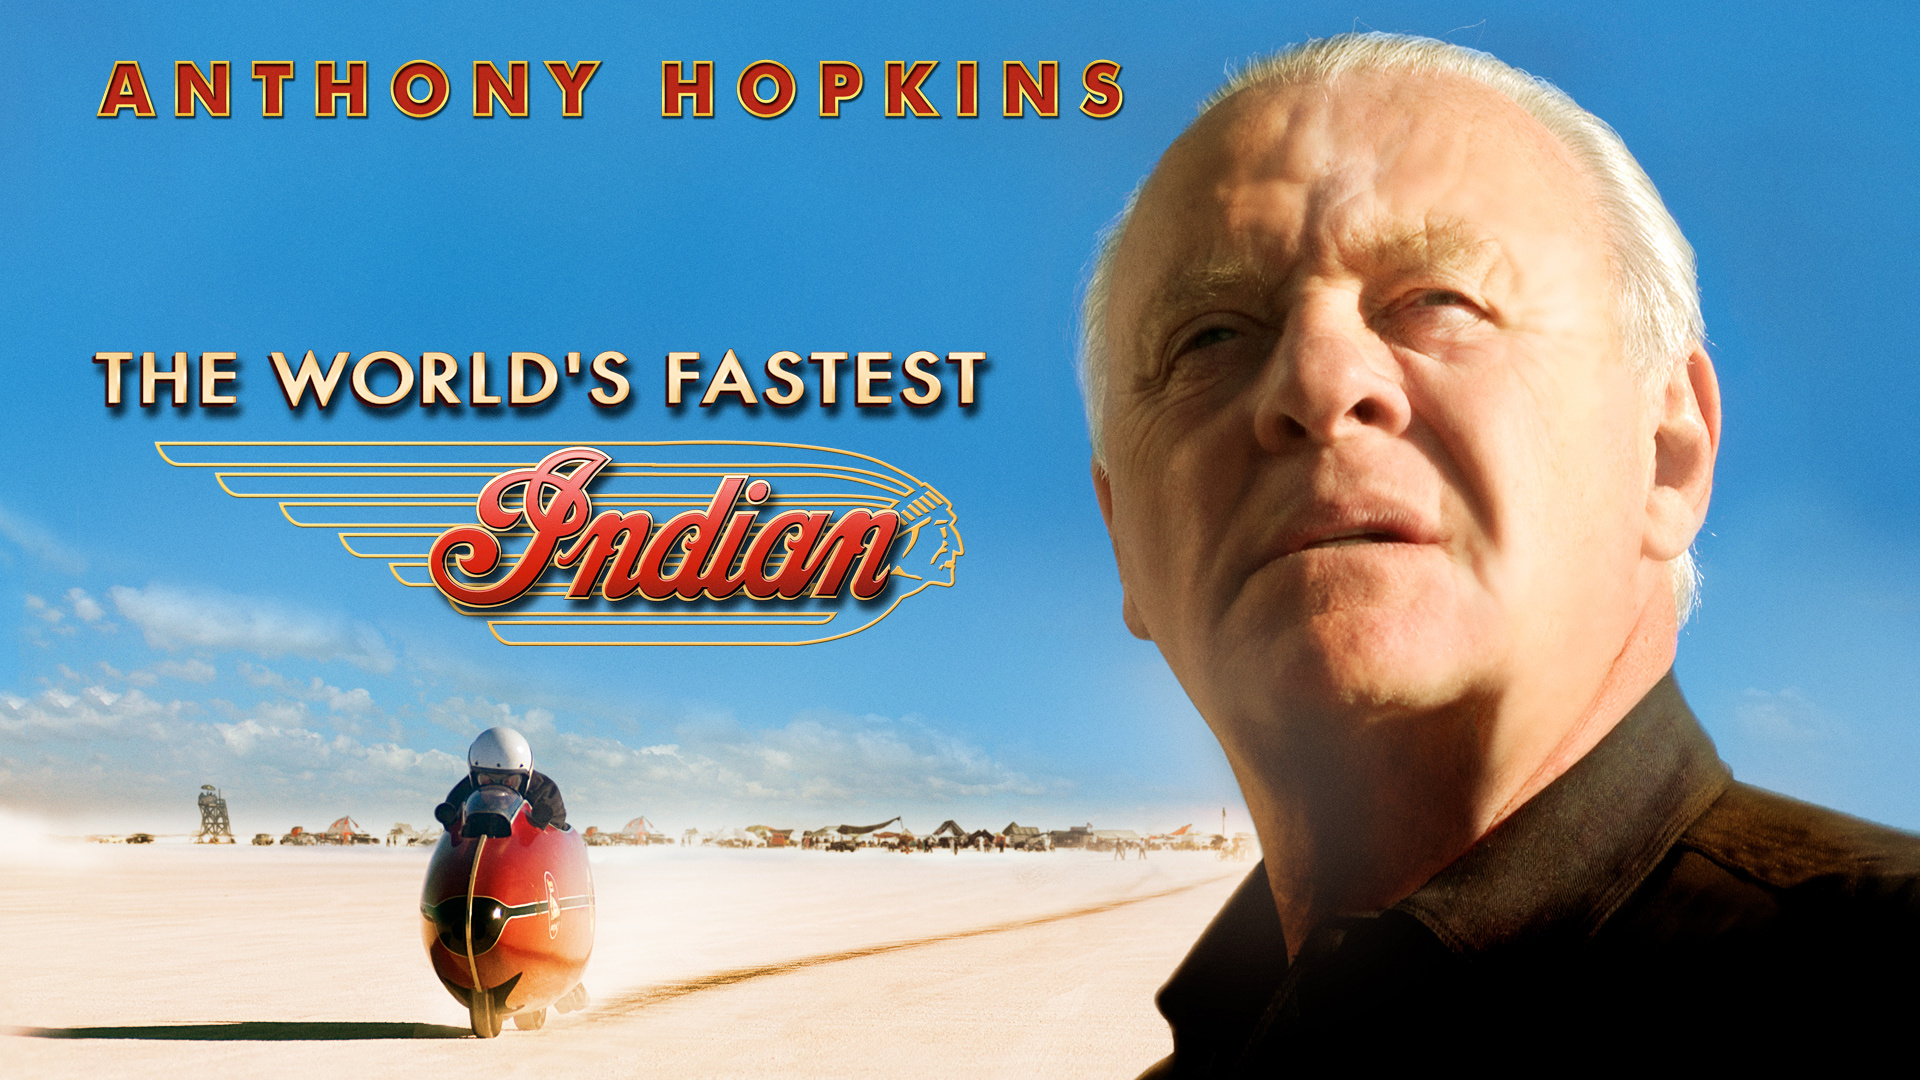 The World's Fastest Indian: The highest grossing local film at the New Zealand box-office. 1920x1080 Full HD Wallpaper.